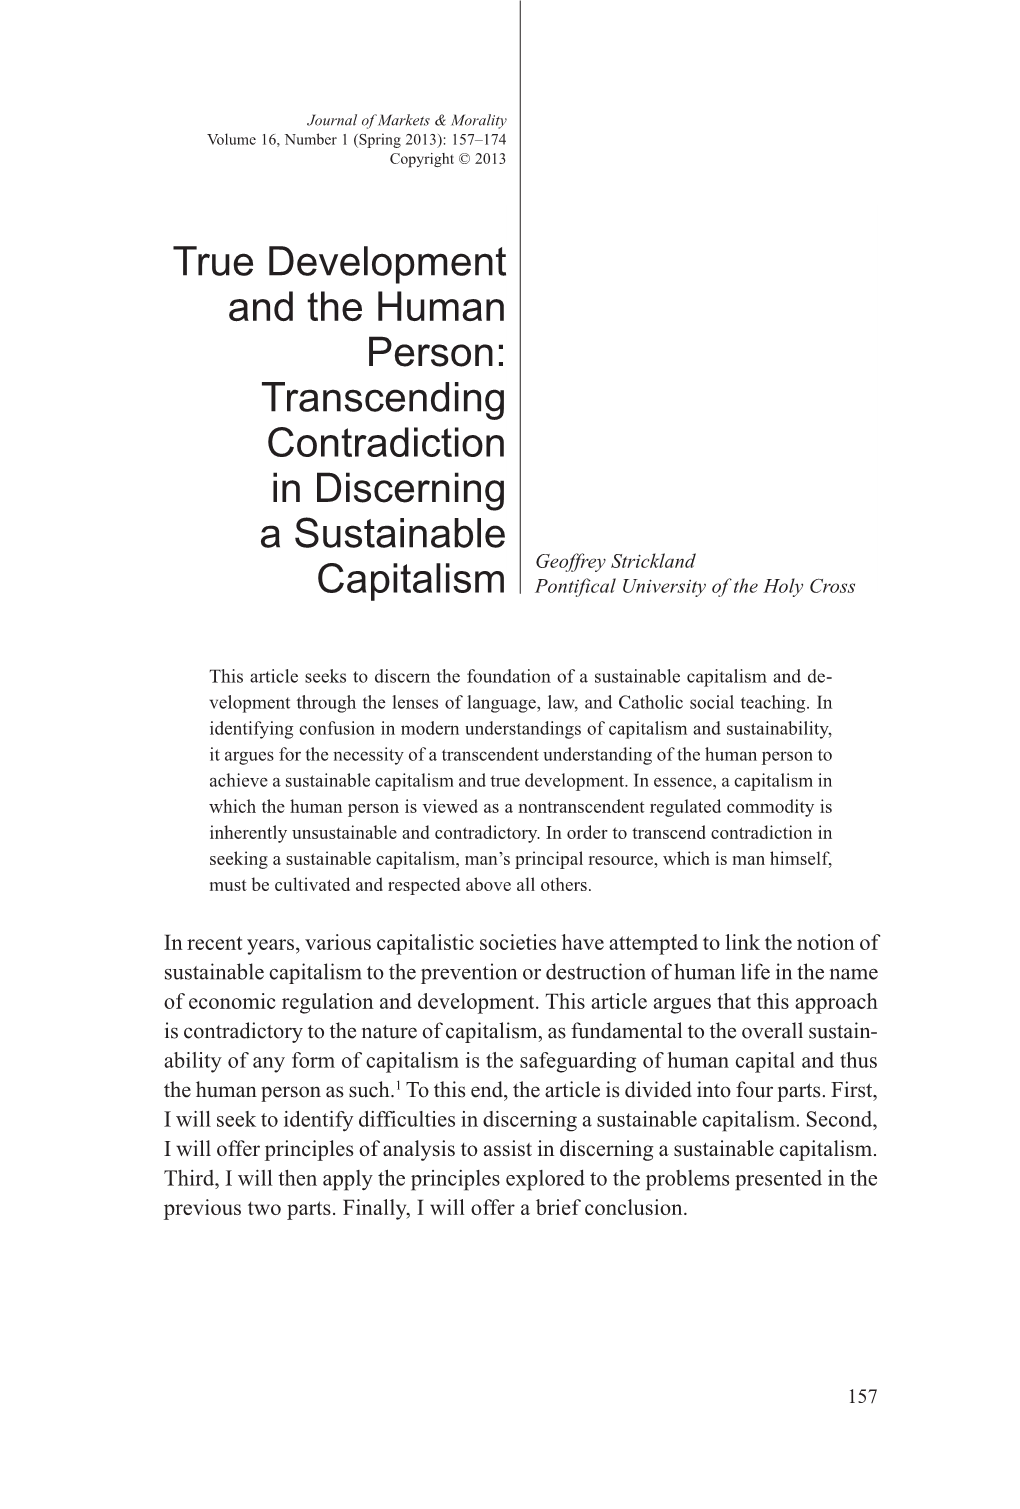 True Development and the Human Person: Transcending Contradiction in Discerning a Sustainable Geoffrey Strickland Capitalism Pontifical University of the Holy Cross